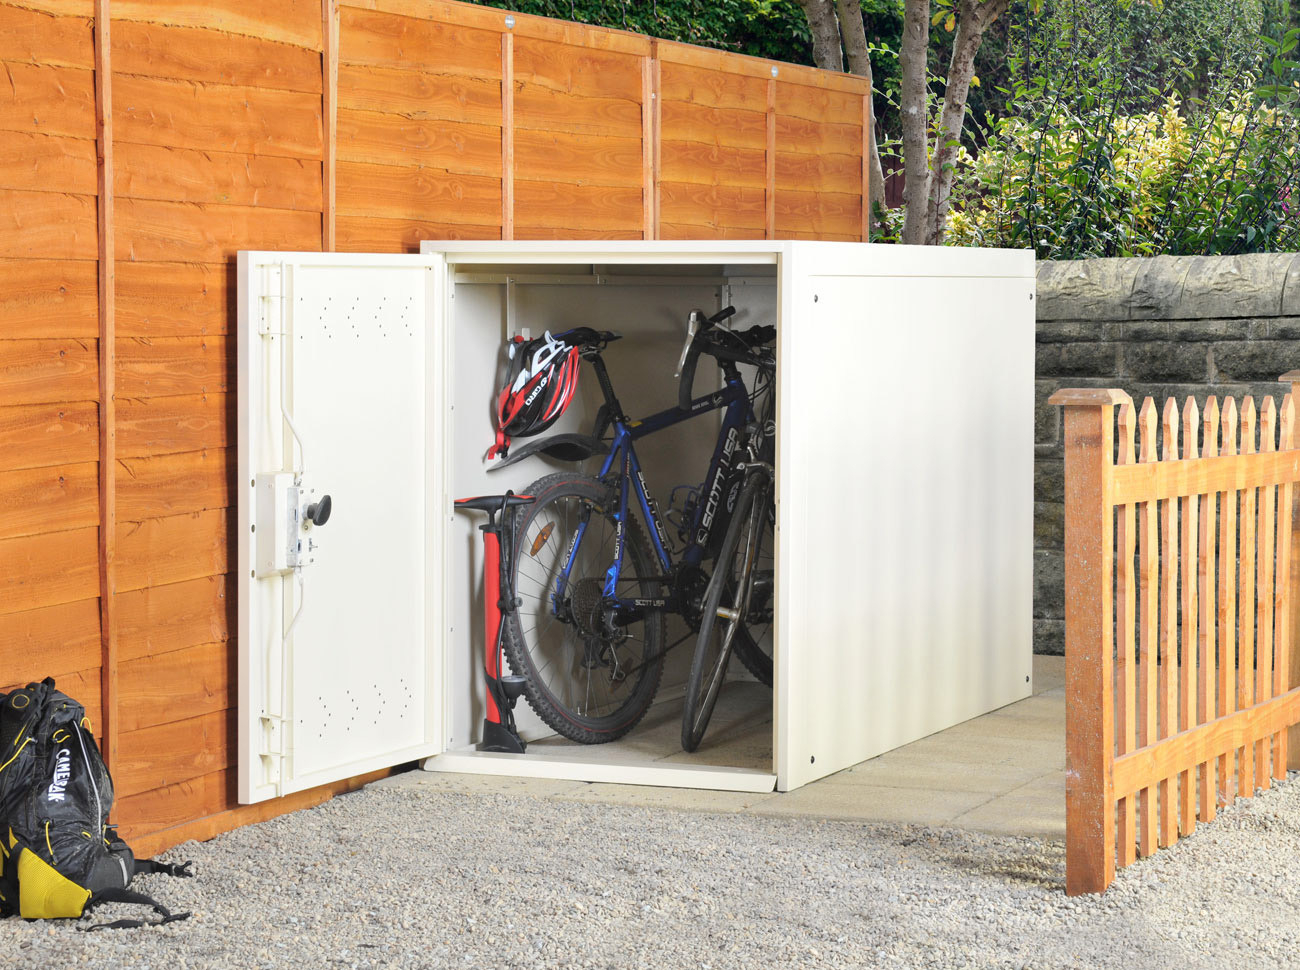 Bike Locker For Storing 2 Bikes Metal Bike Lockers Shelters From with sizing 1300 X 970